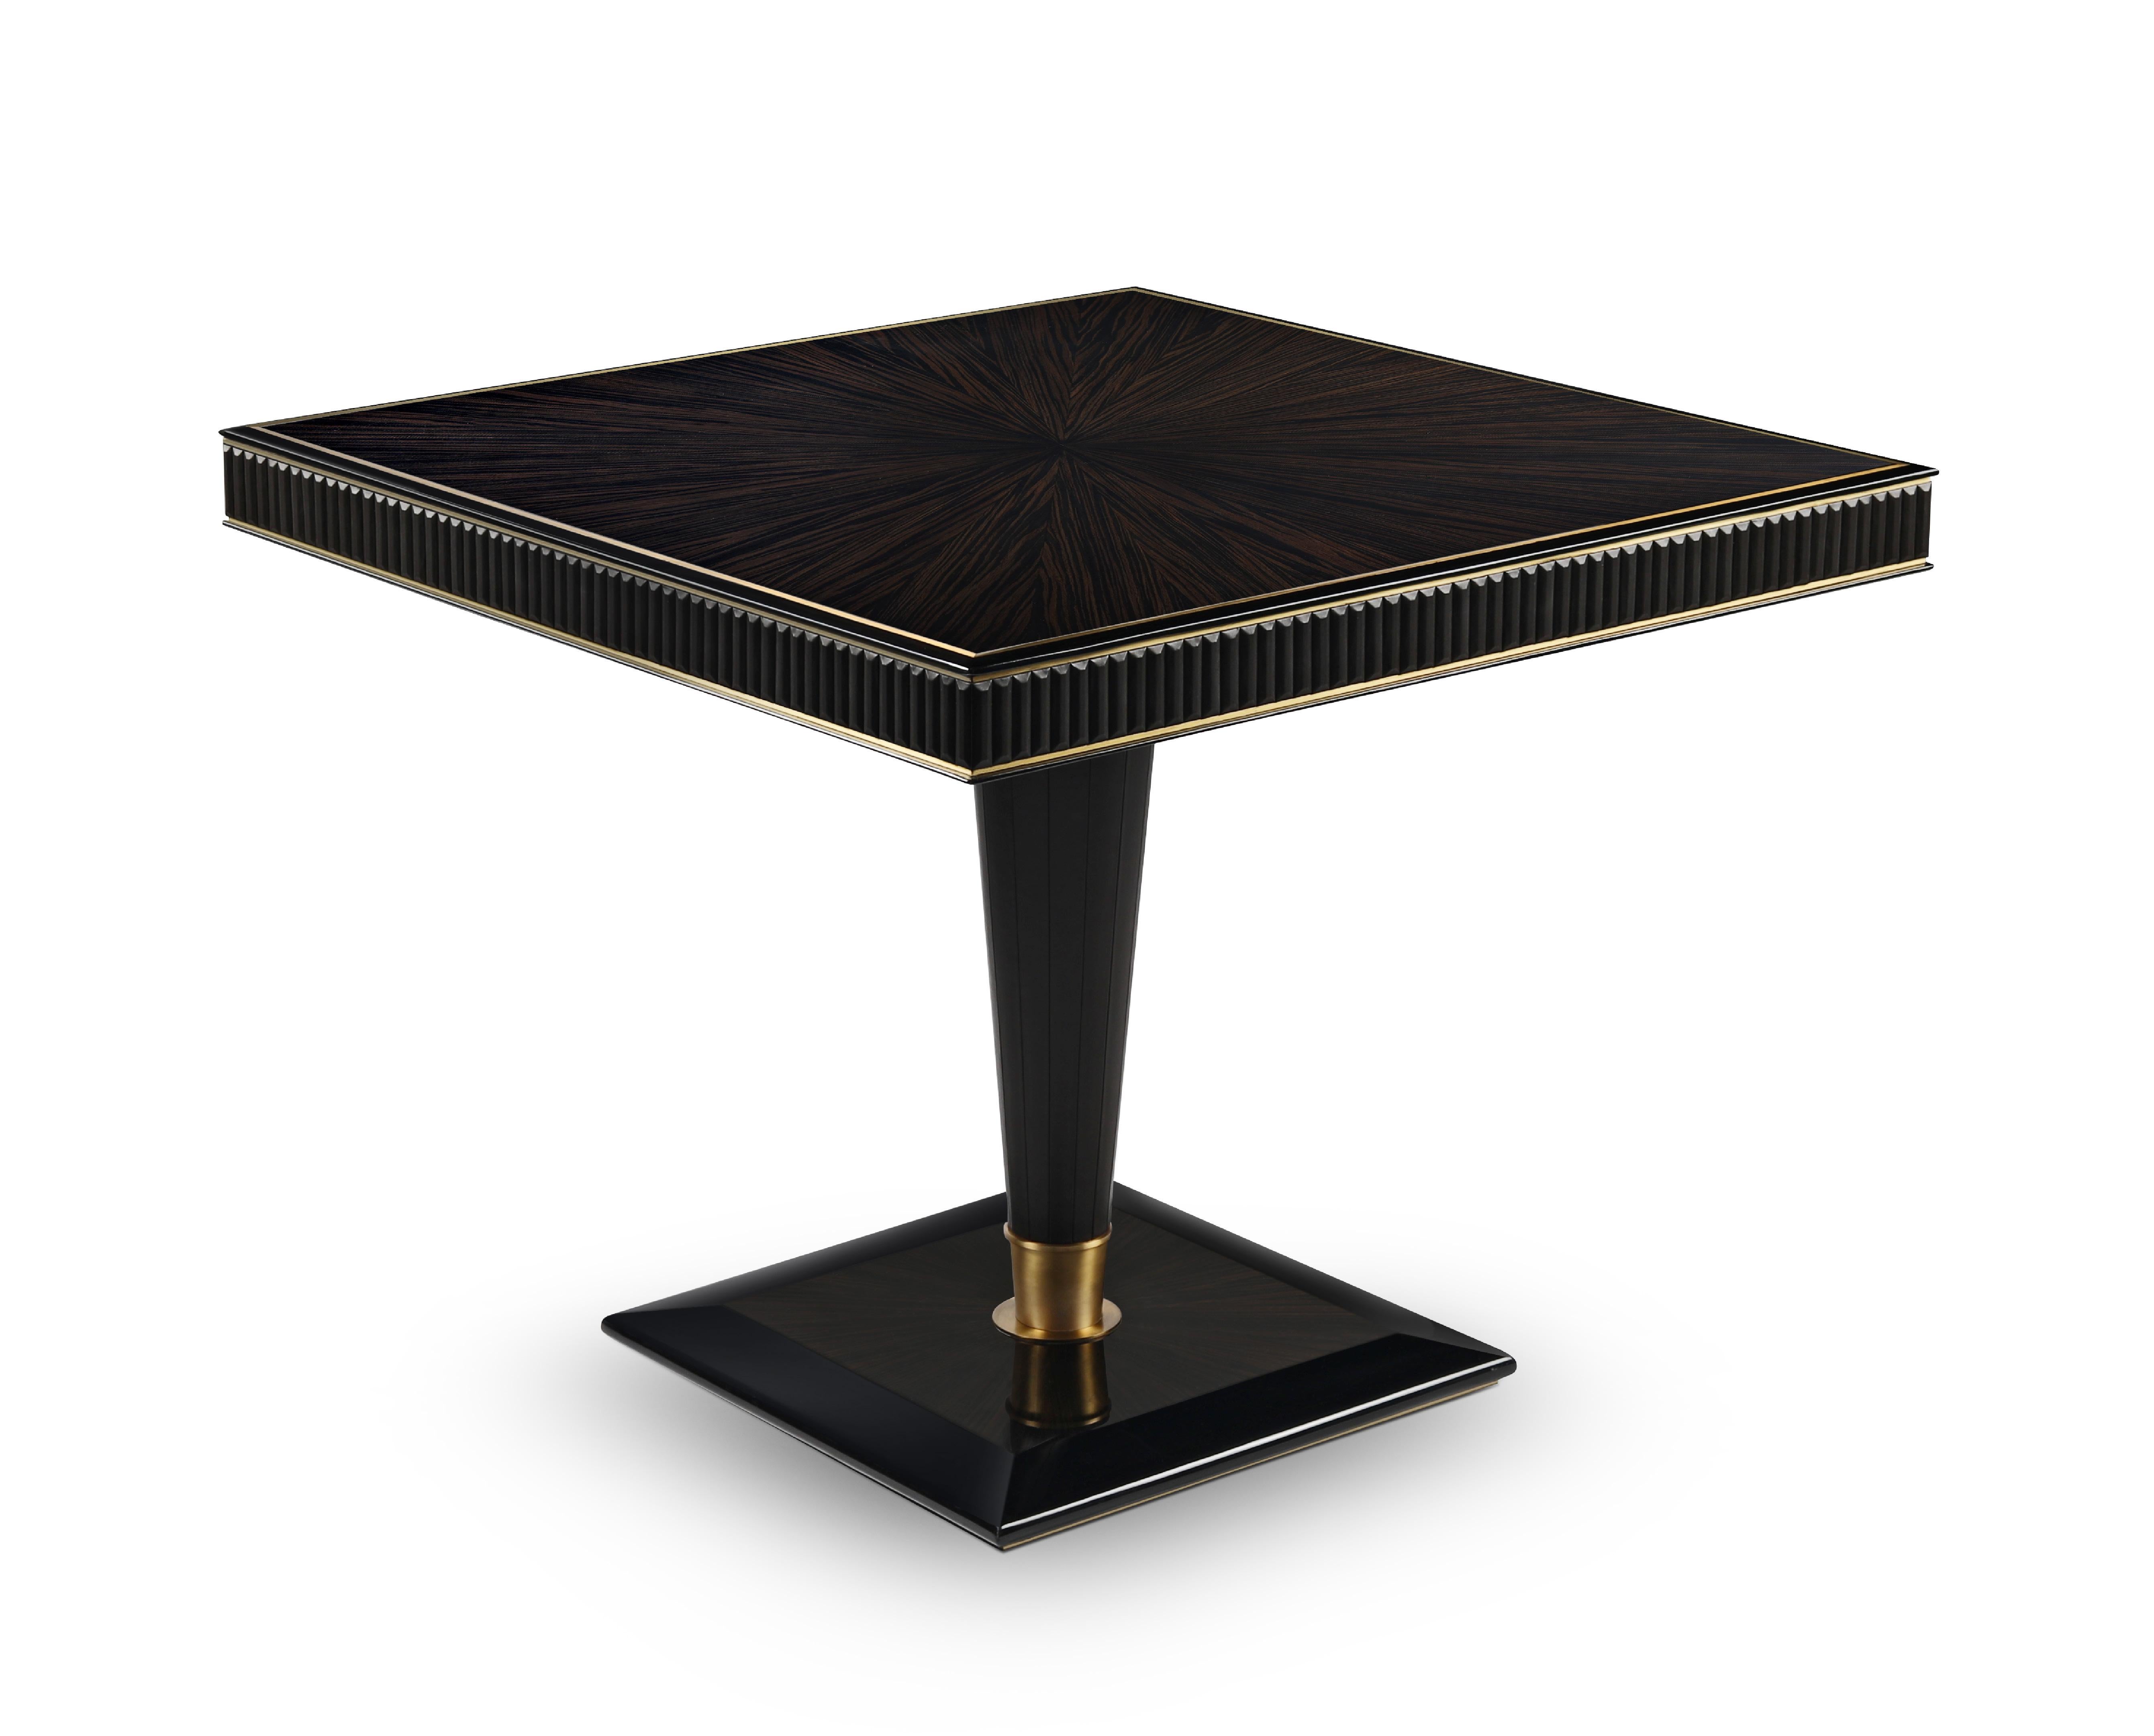 Flint table with leather and brass by Madheke
Dimensions: W 85 x D 85 x H 68.5 cm
Materials: Leather, metal, wood

The veneer marquetry tabletop finish of FLINT is skilfully edged with a lacquered and glossy finish. The polished metal square